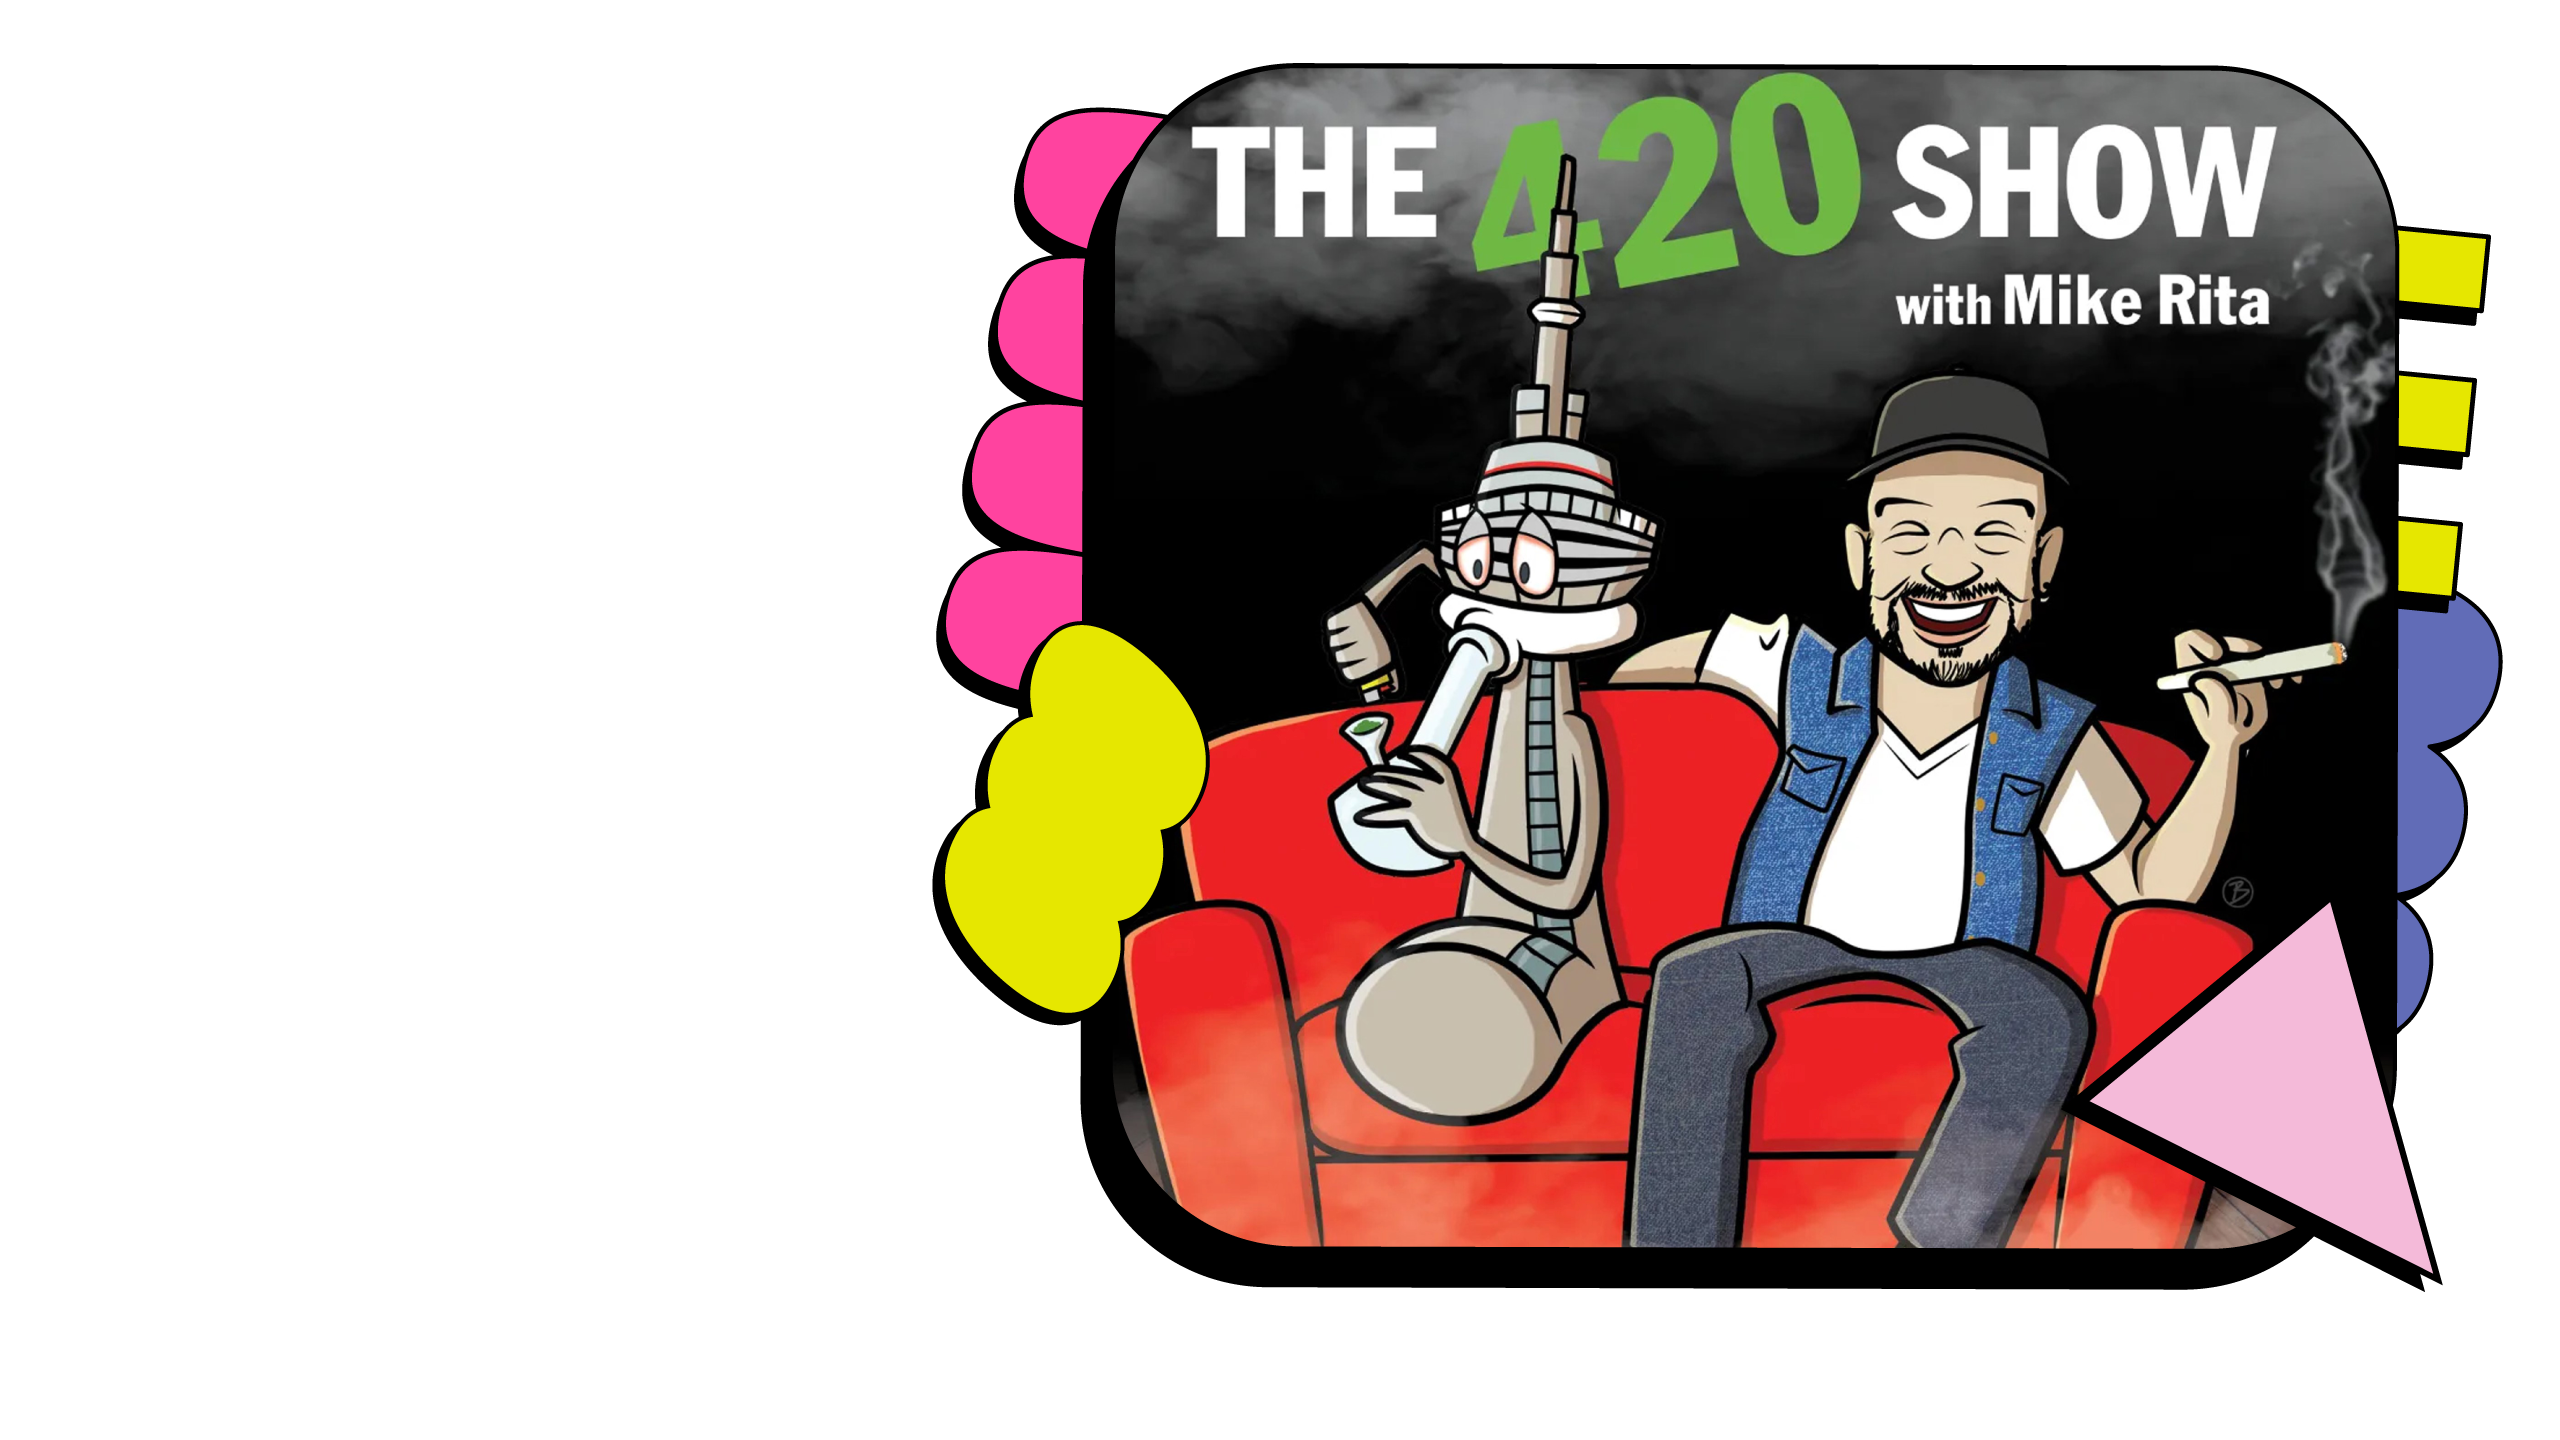 Promotional image for The 420 Show With Mike Rita